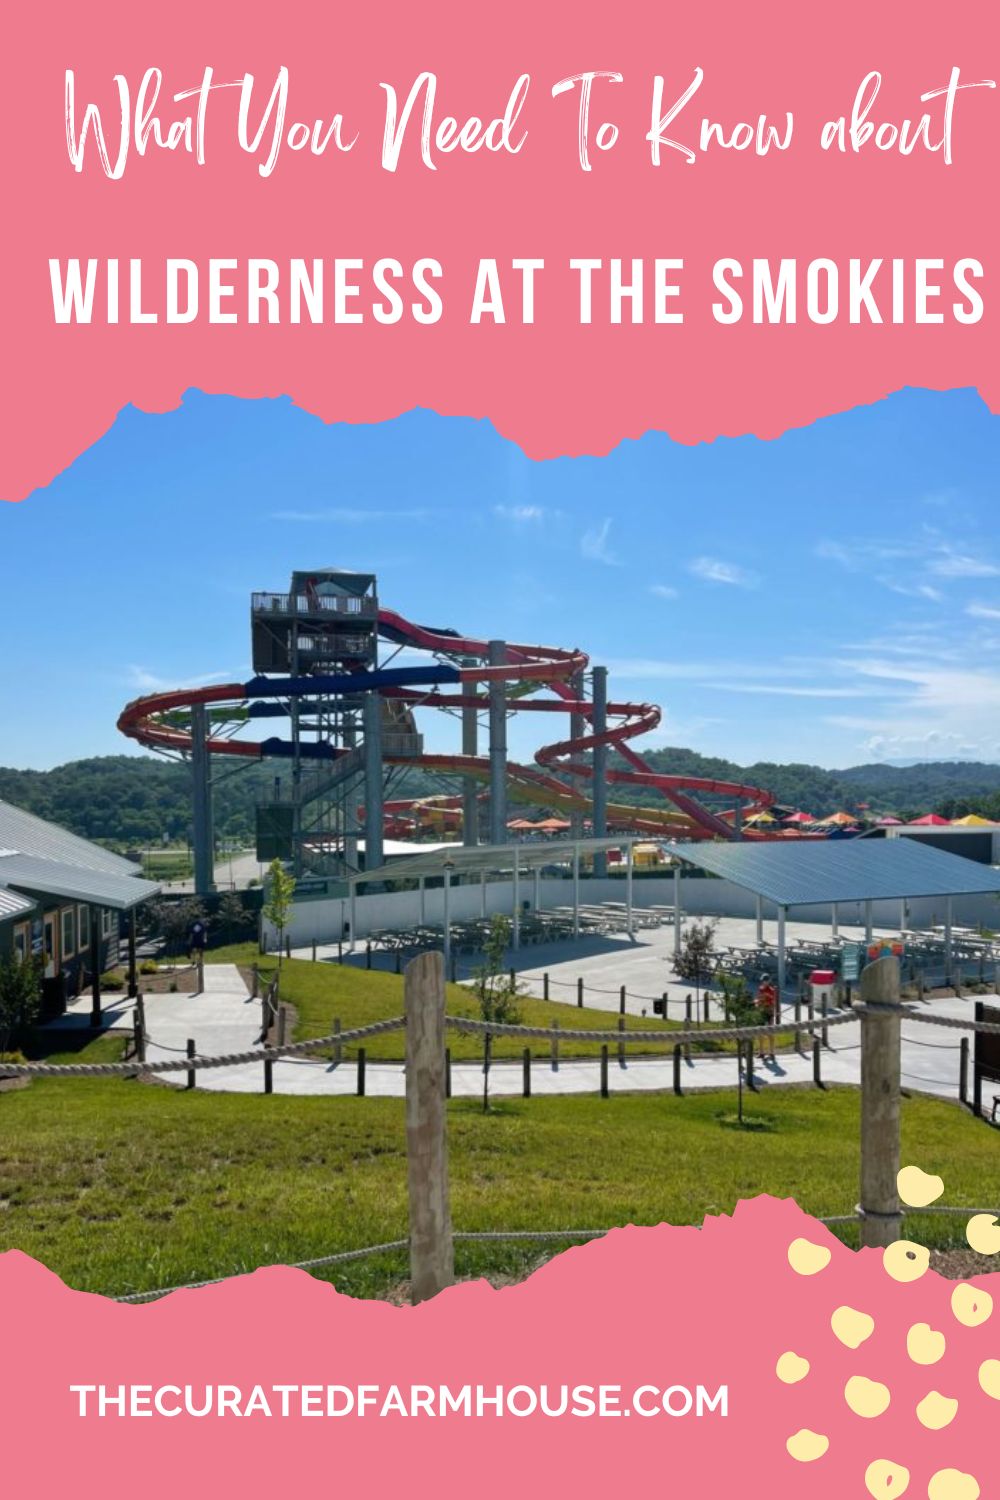 What You Need To Know about Wilderness at the Smokies